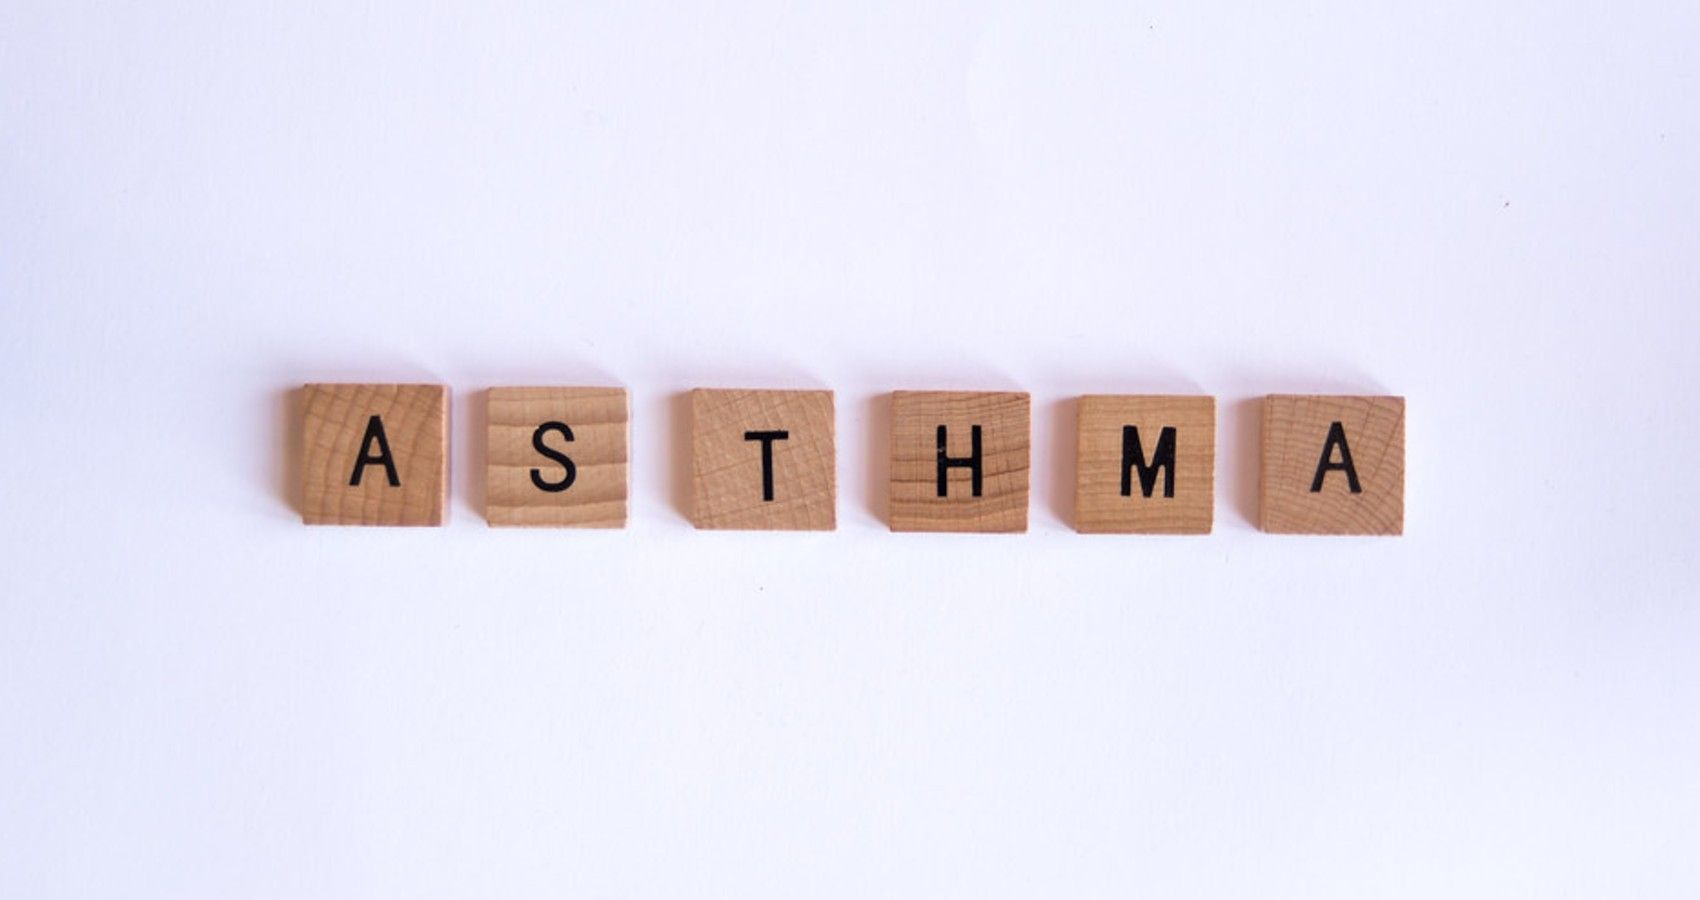 The word asthma spelt out with scrabble tiles